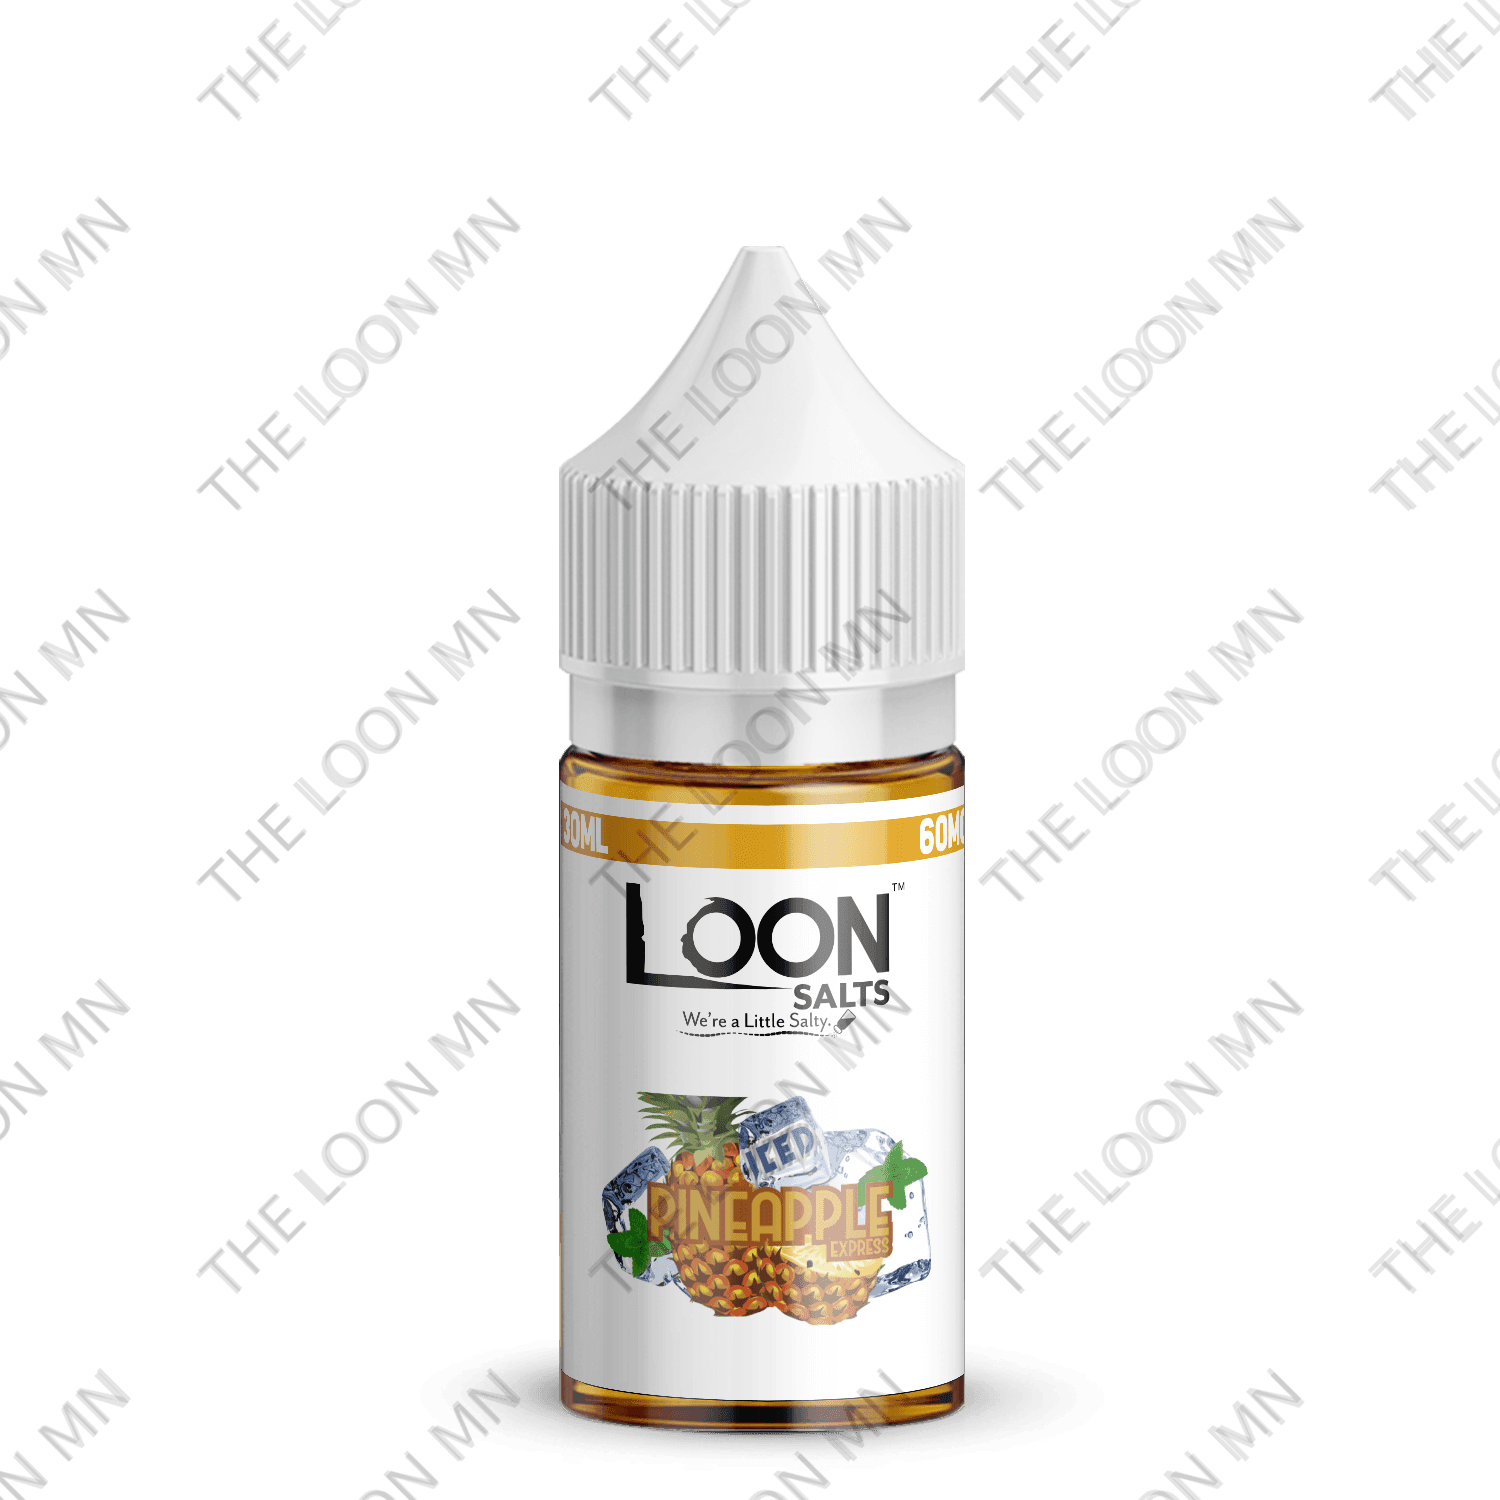 LOON SALTS - ICED PINEAPPLE EXPRESS – The Loon